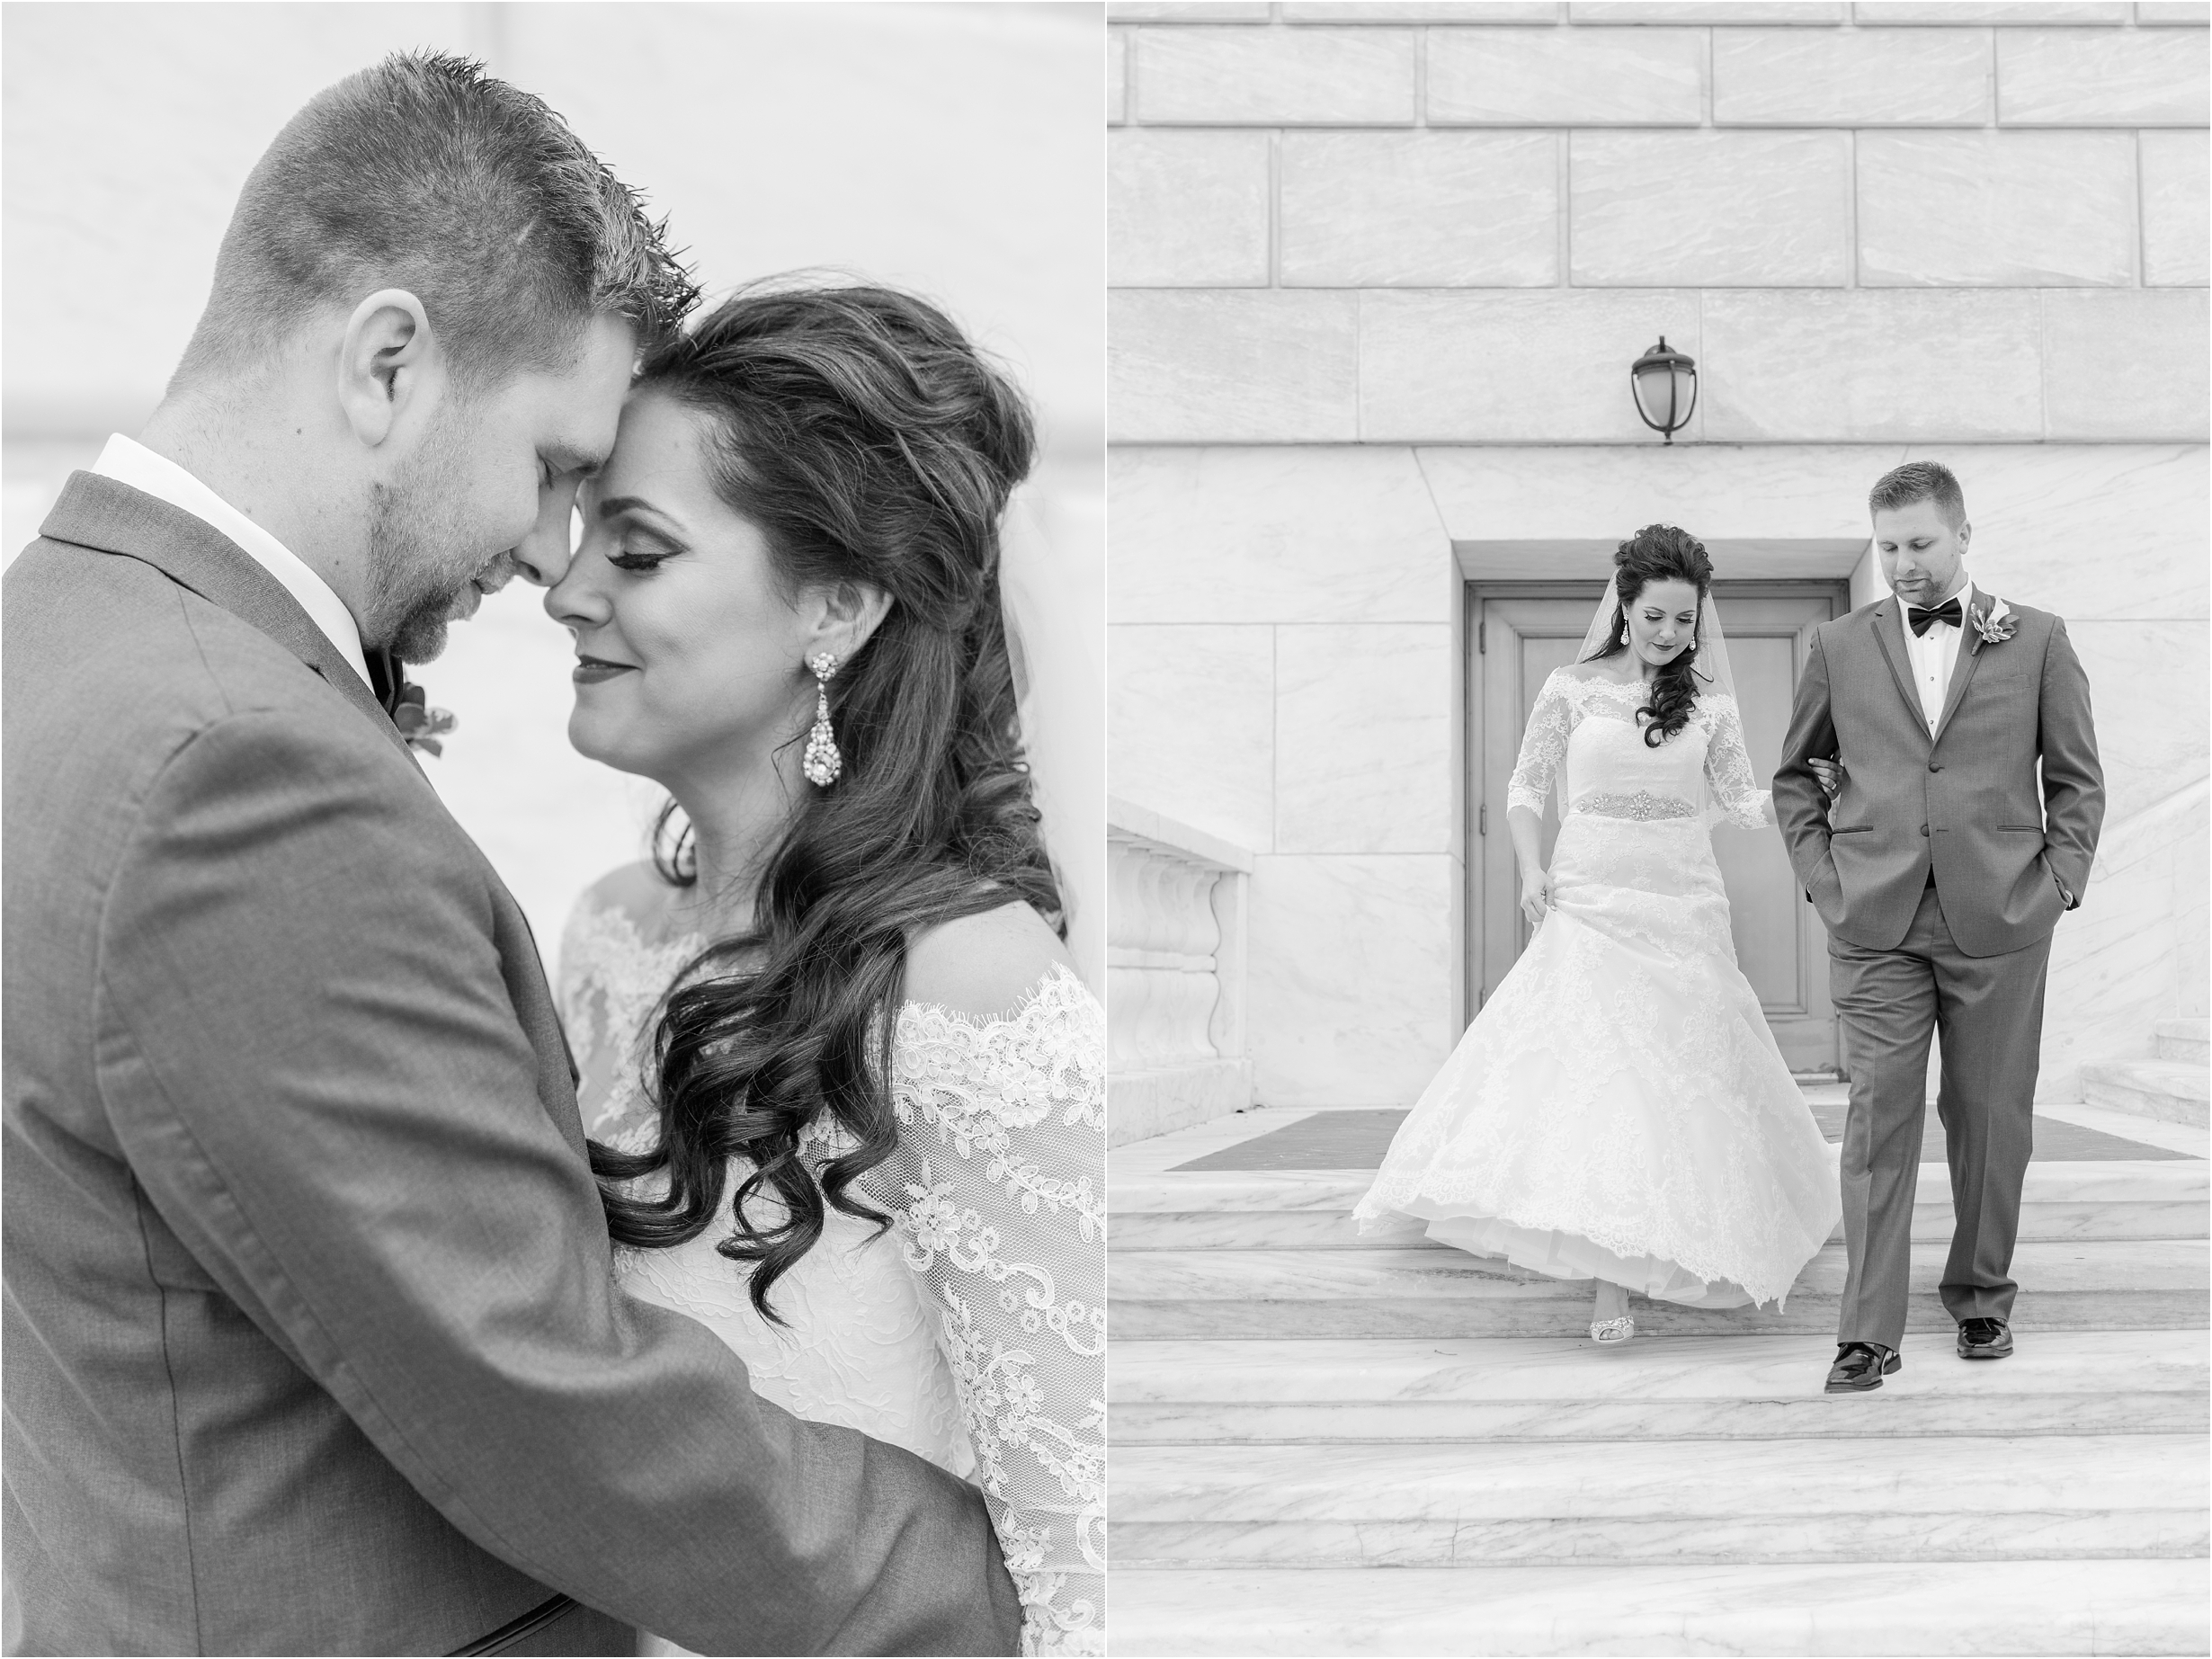 romantic-timeless-candid-wedding-photos-at-the-detroit-institute-of-arts-in-detroit-mi-by-courtney-carolyn-photography_0003.jpg